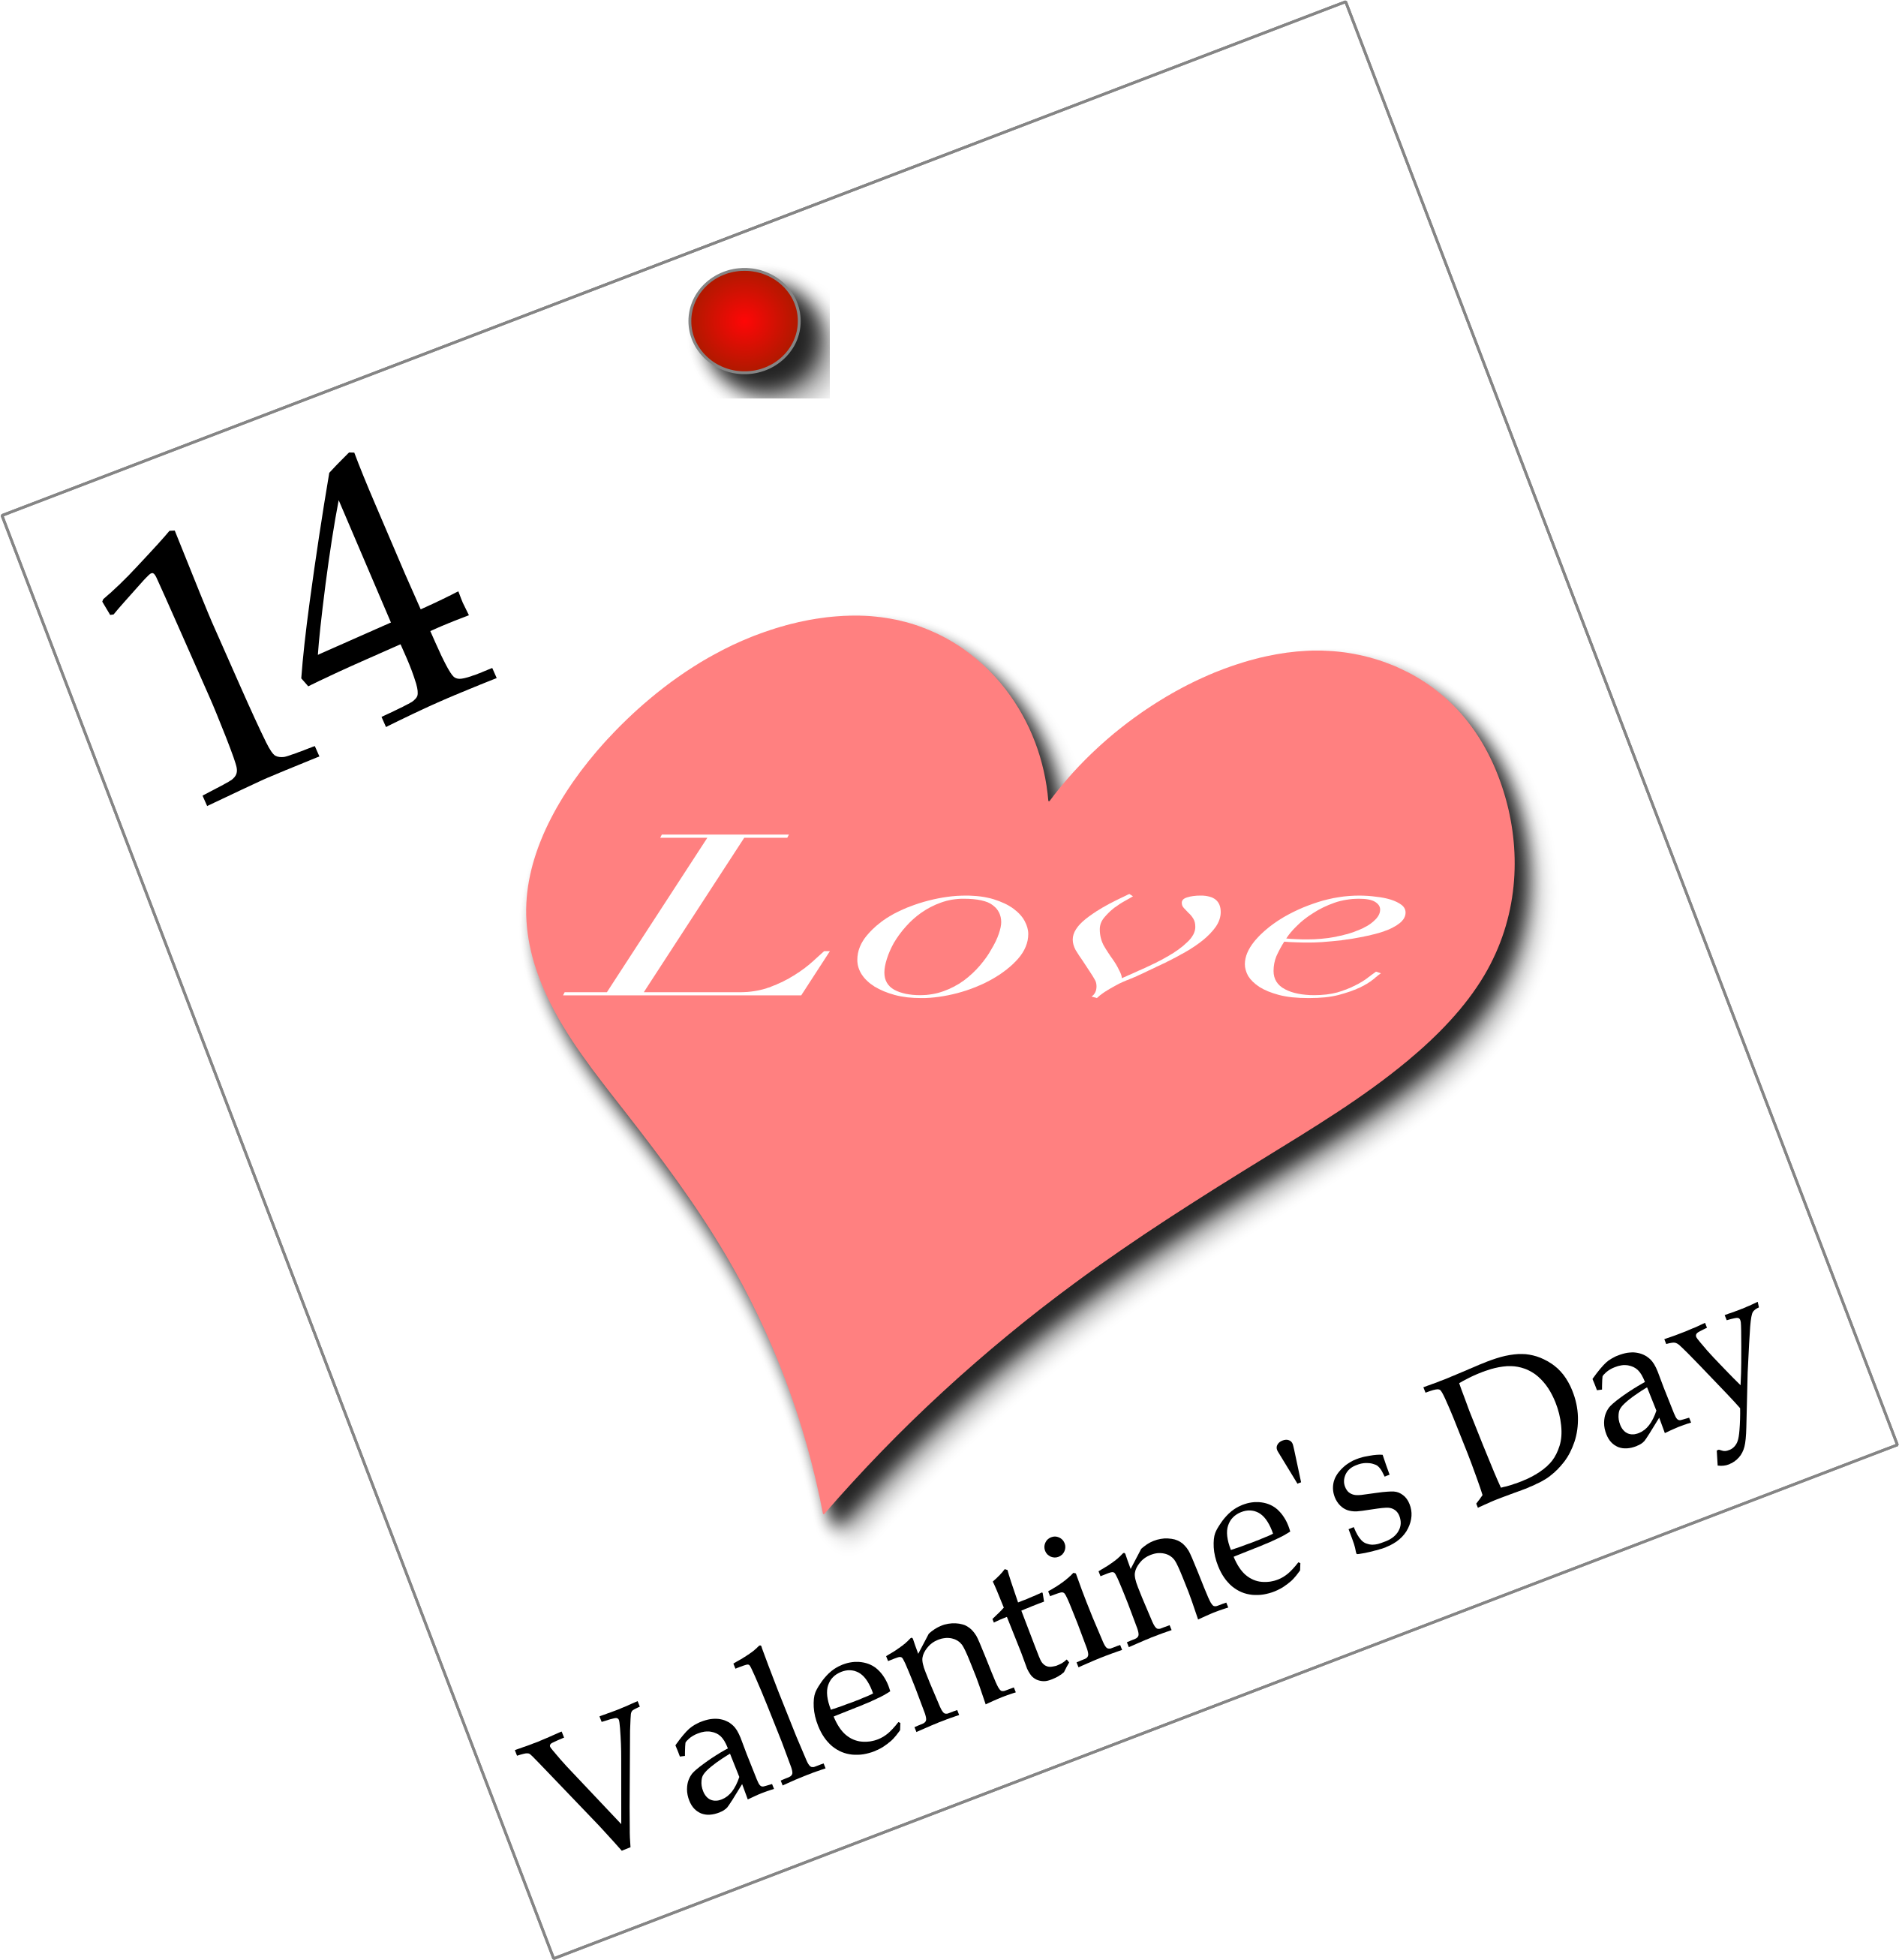 I Love You Clipart Animated - Free Clipart Images